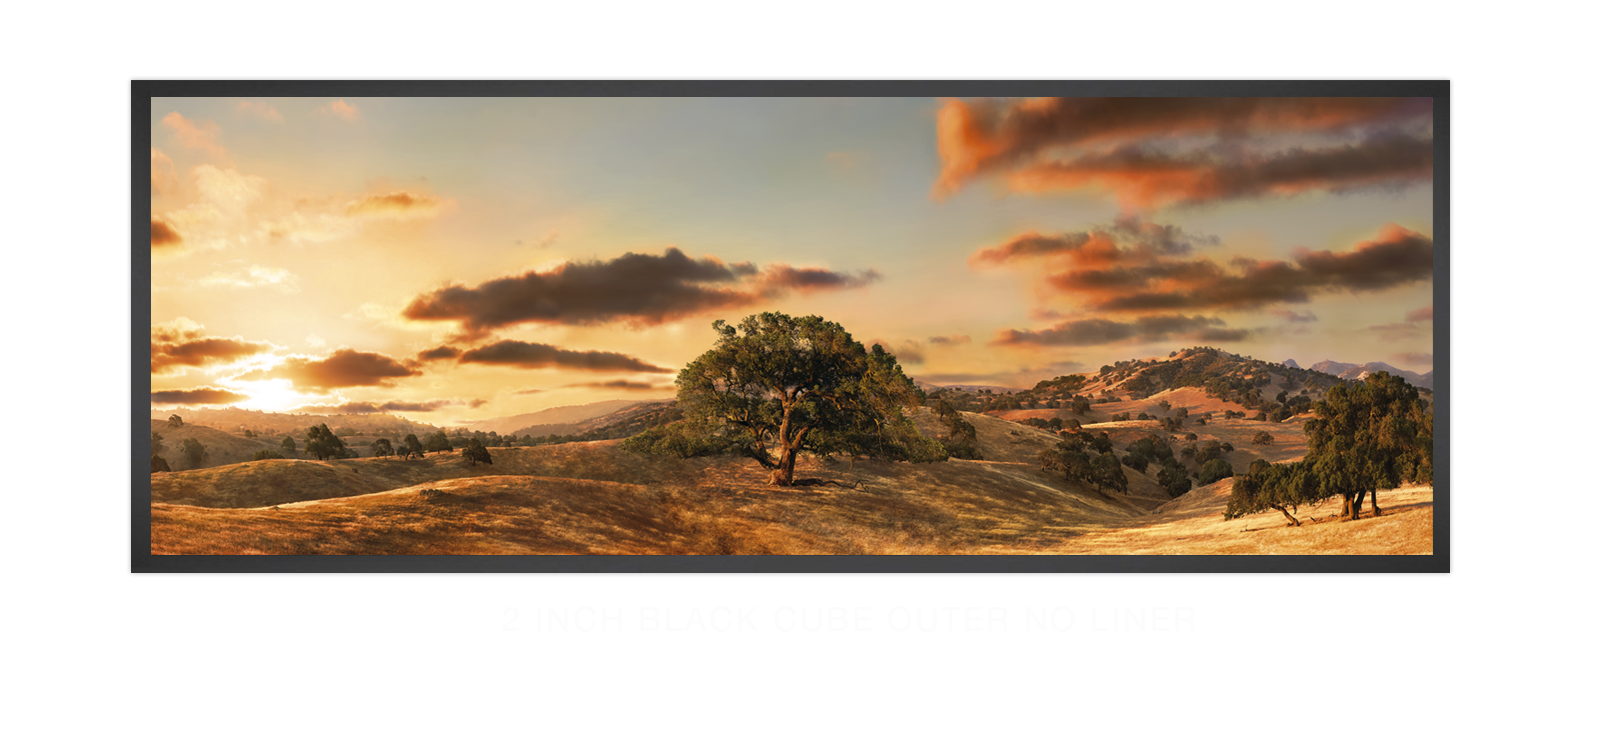 10OAKS 2 Inch Black Cube Outer w_No Liner T